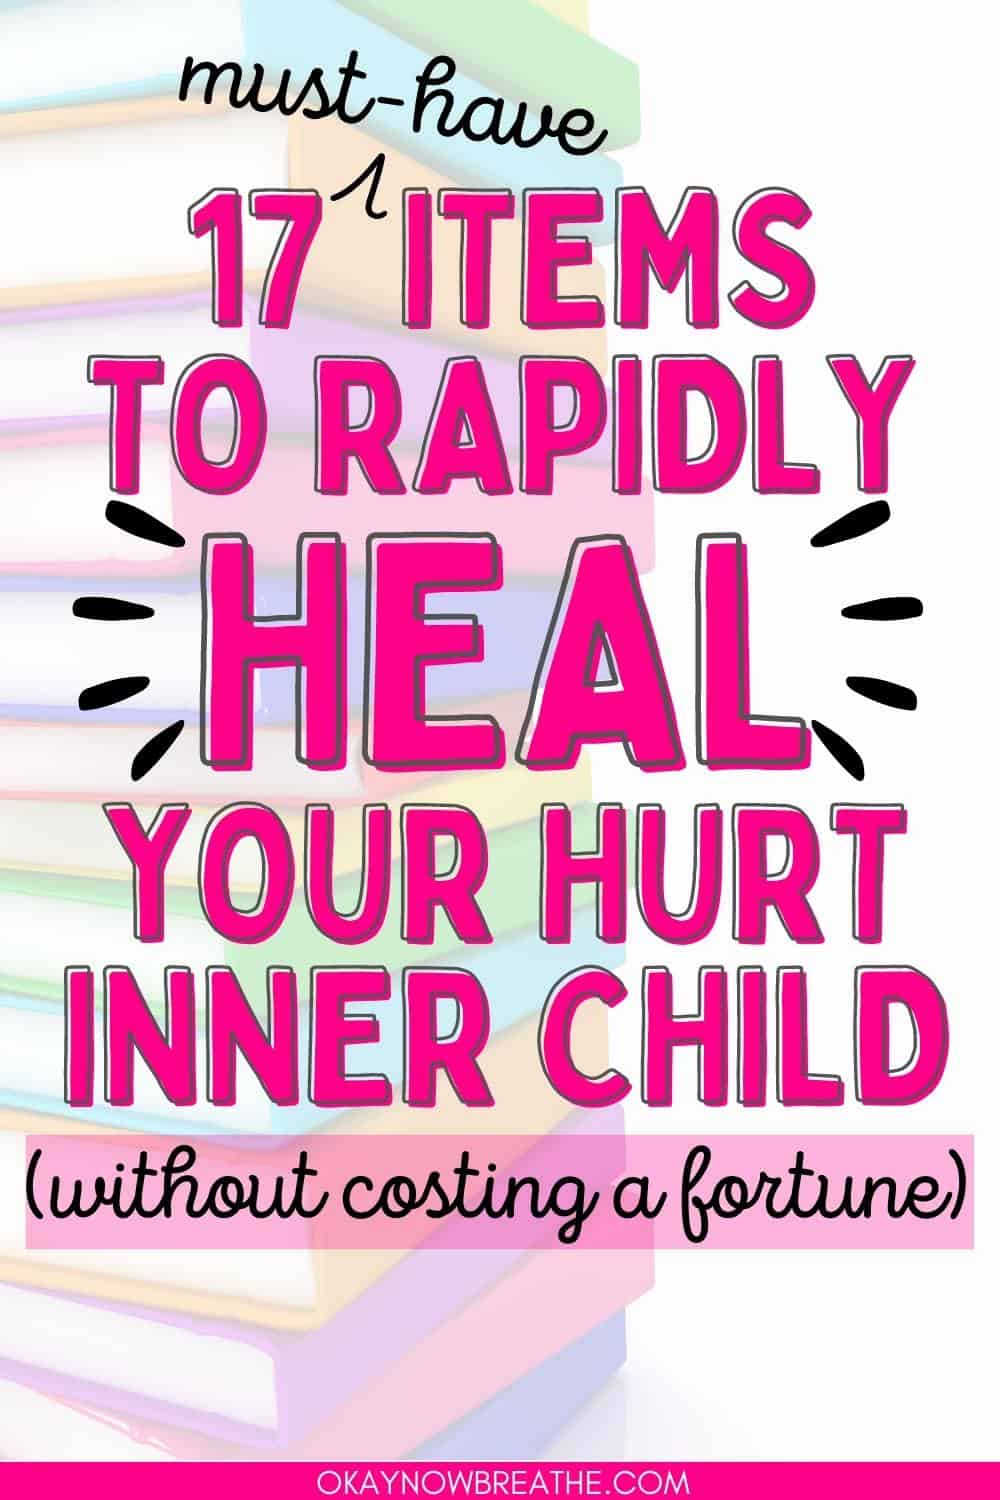 There are hardcover books in various colors stacked up on top of each other. Text overlay over this image says: 17 must-have items to rapidly heal your hurt inner child without costing a fortune)